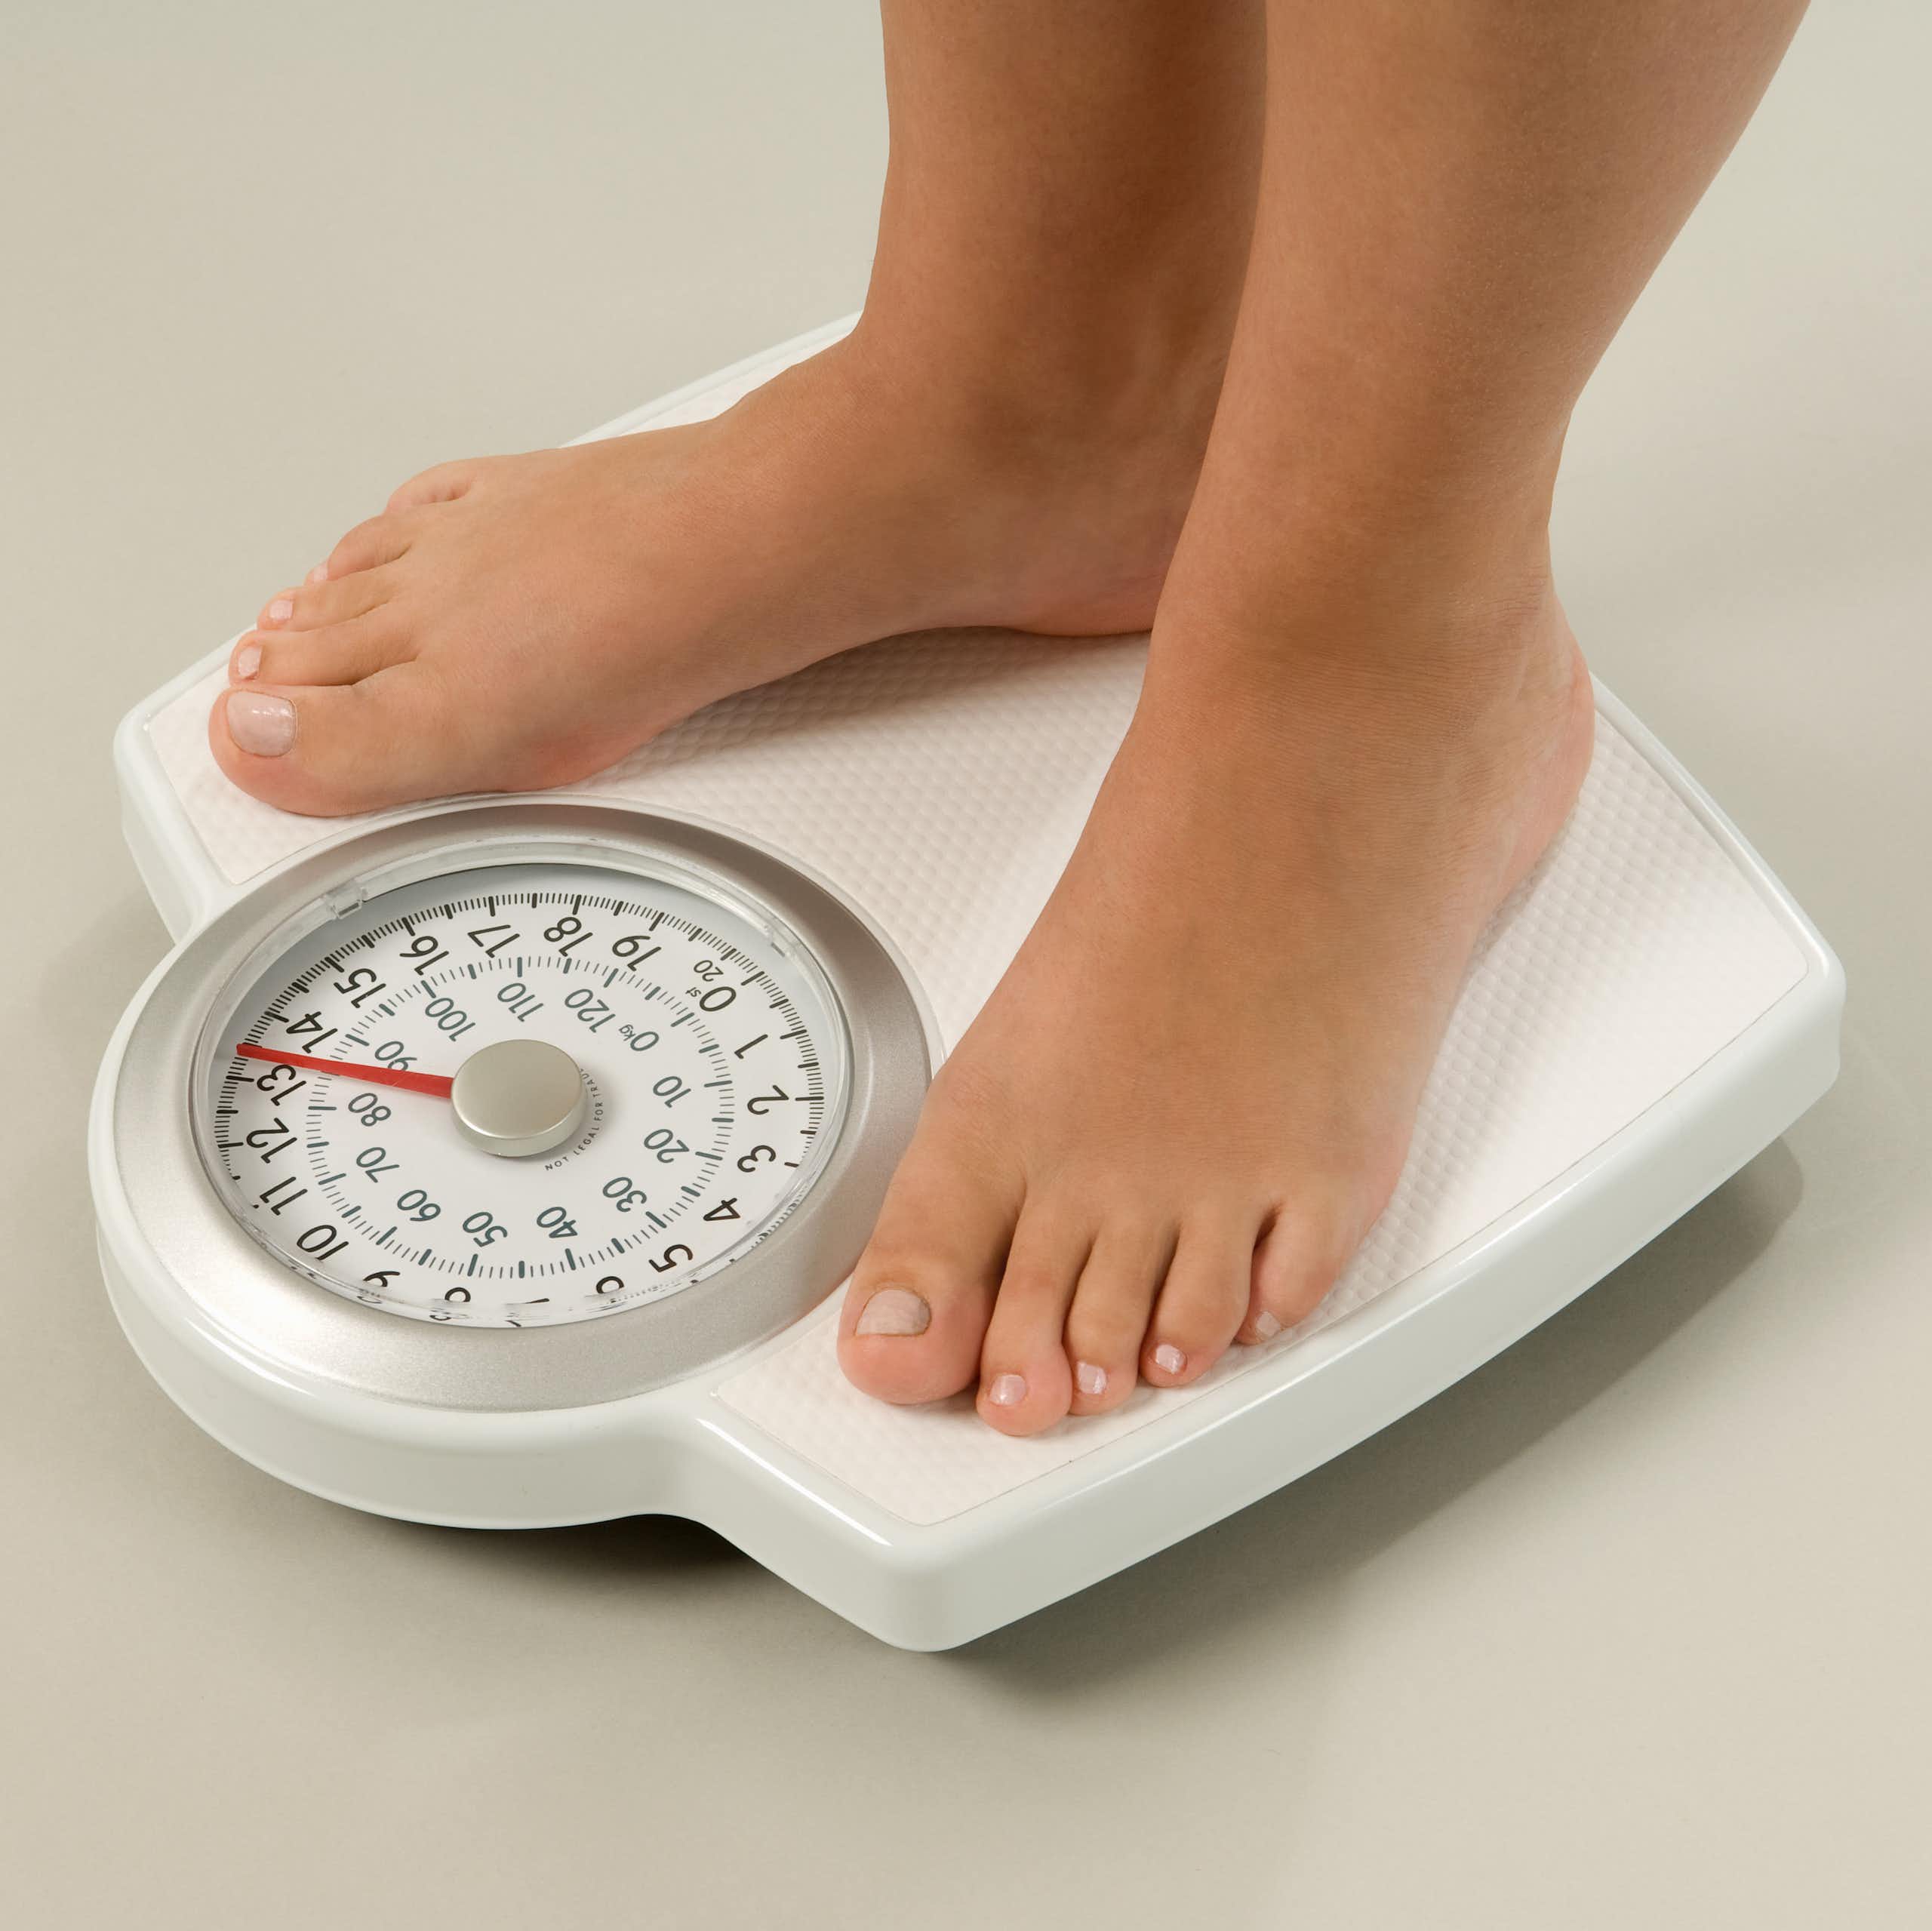 Does obesity really increase your risk of dementia?